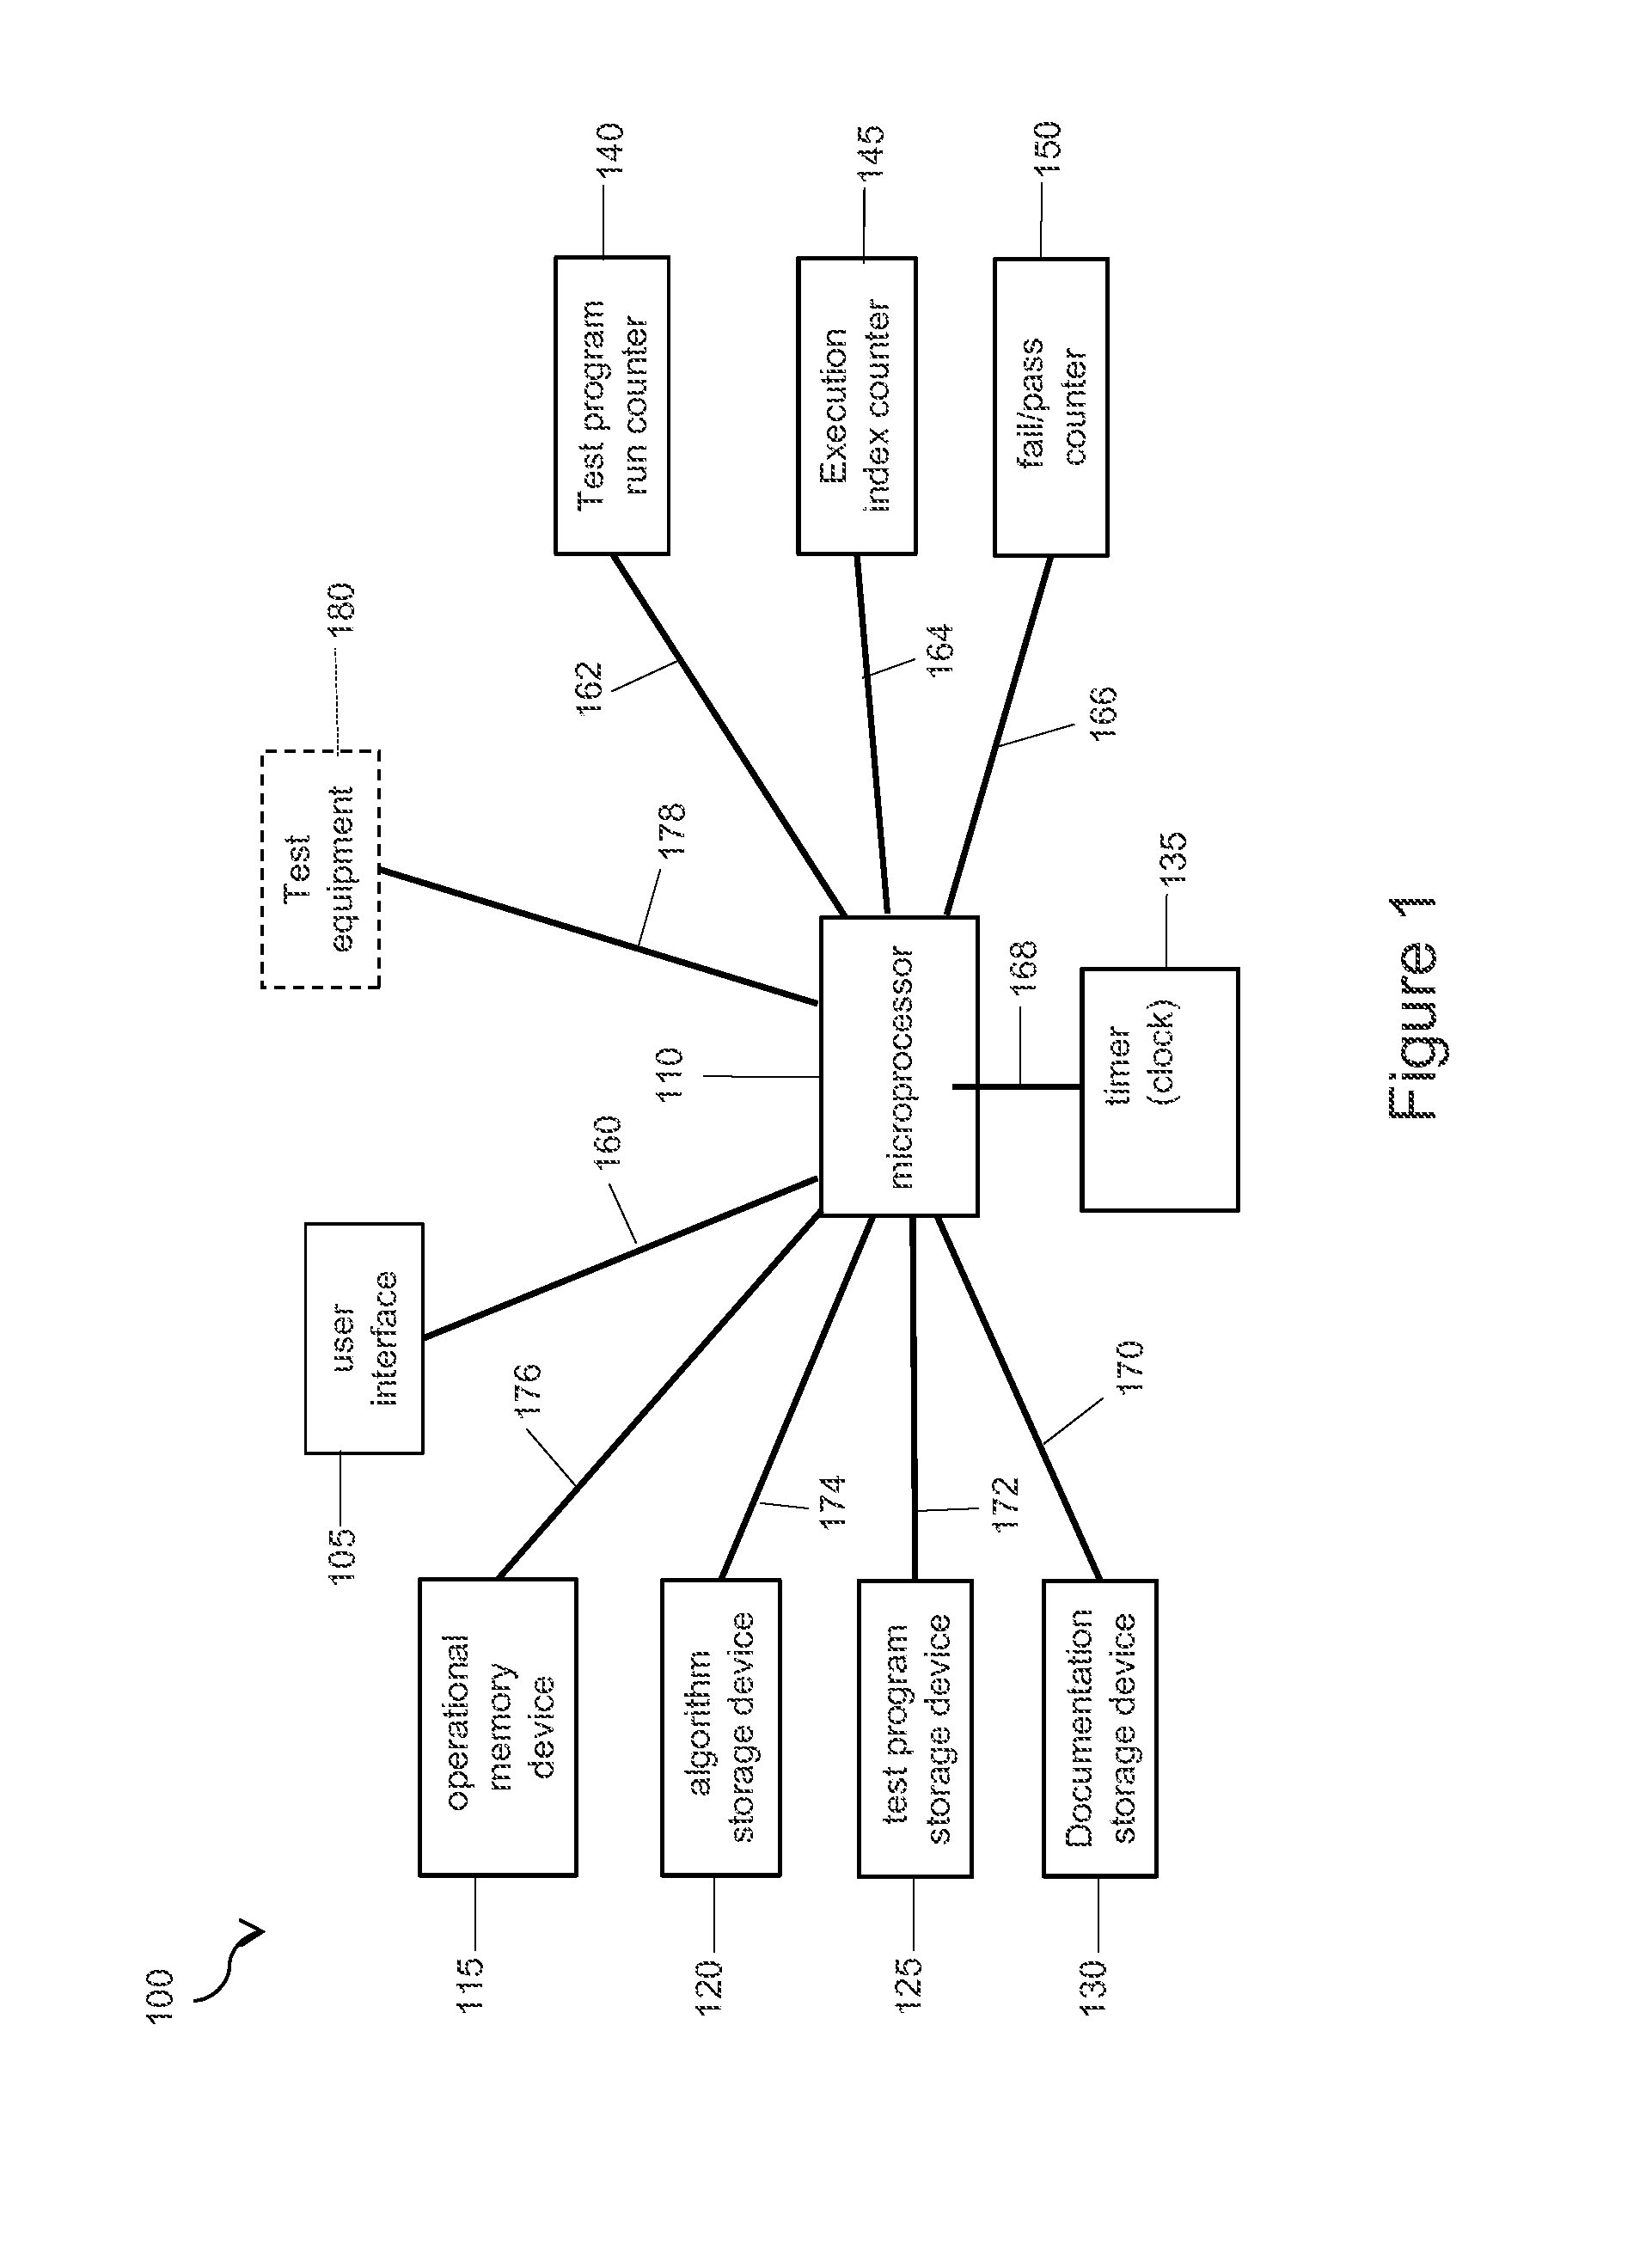 Machine and Methods for Reassign Positions of a Software Program Based on a Fail/Pass Performance